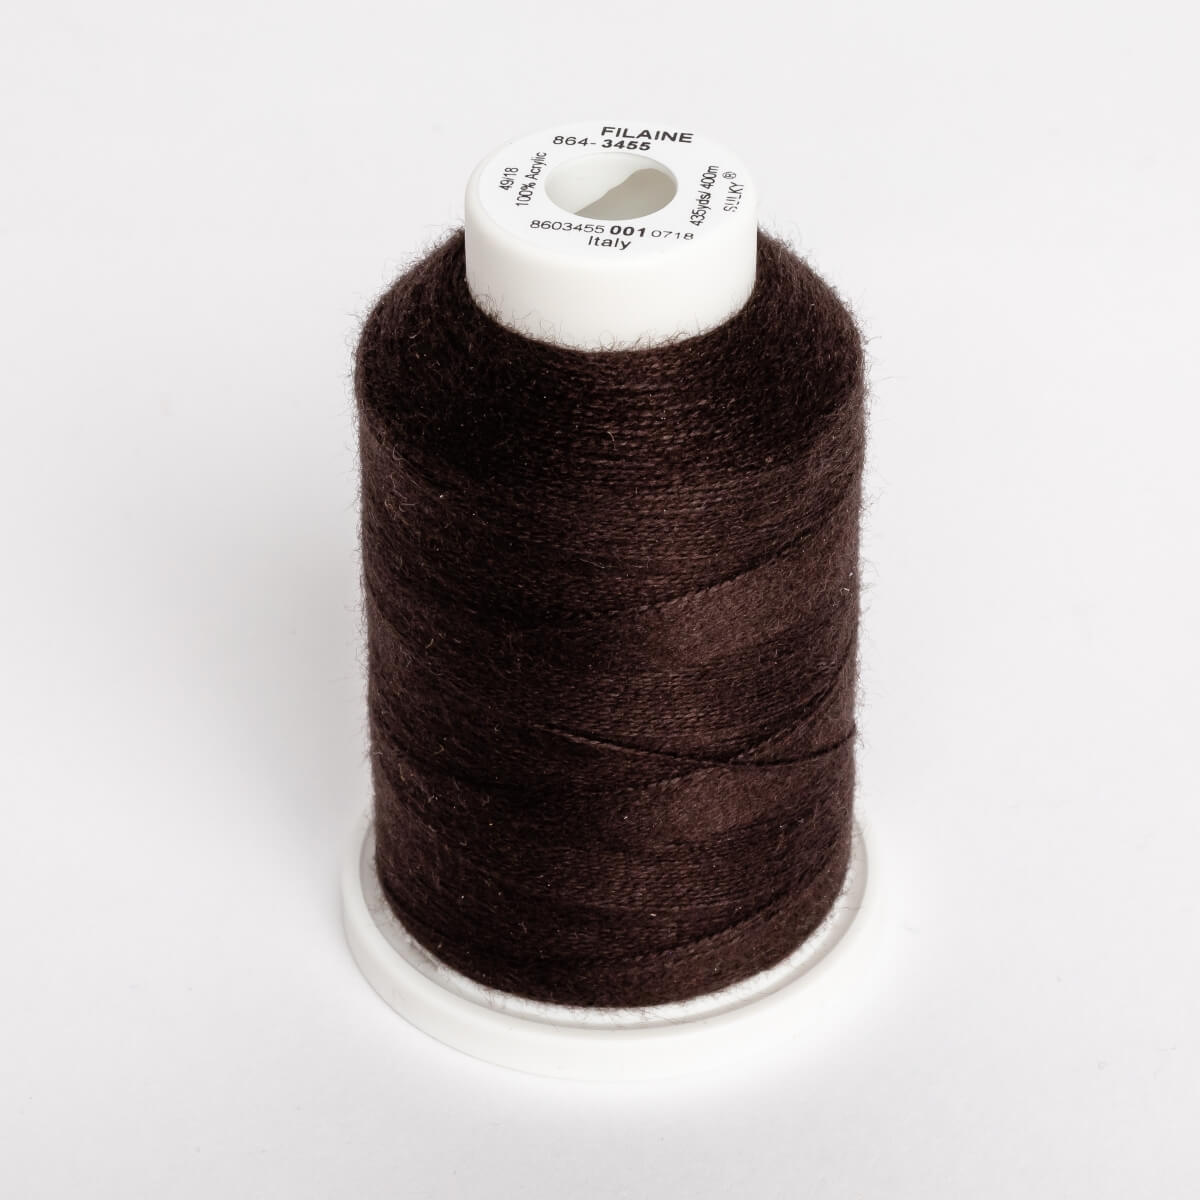 SULKY FILAINE 12, 400m/435yds Maxi Spools - Colour 3455 Very Dk. Brown